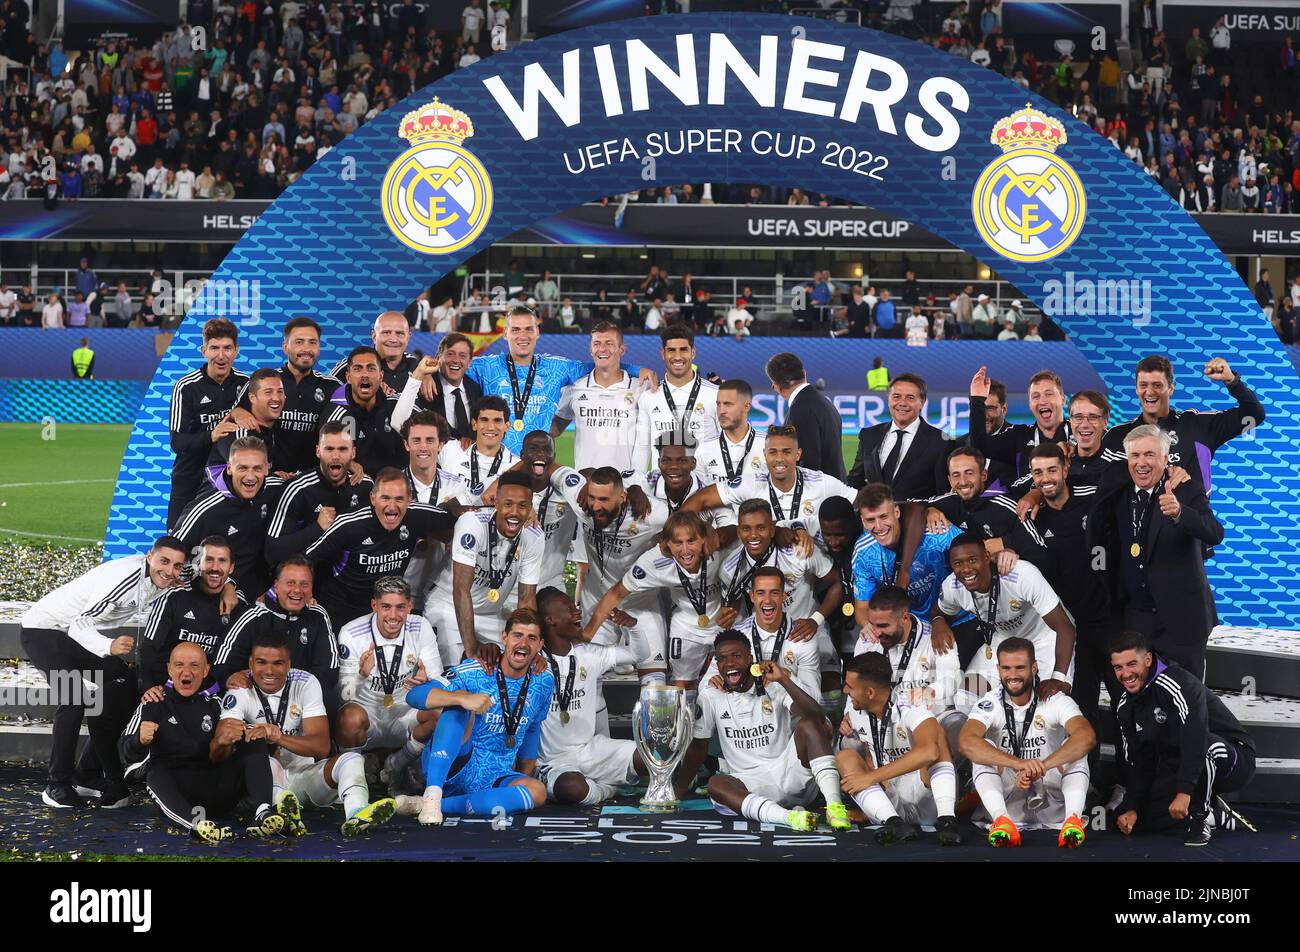 Soccer Football - European Super Cup - Real Madrid v Eintracht Frankfurt - Helsinki Olympic Stadium, Helsinki, Finland - August 10, 2022 Real Madrid players celebrate with the trophy after winning the European Super Cup REUTERS/Kai Pfaffenbach Stock Photo